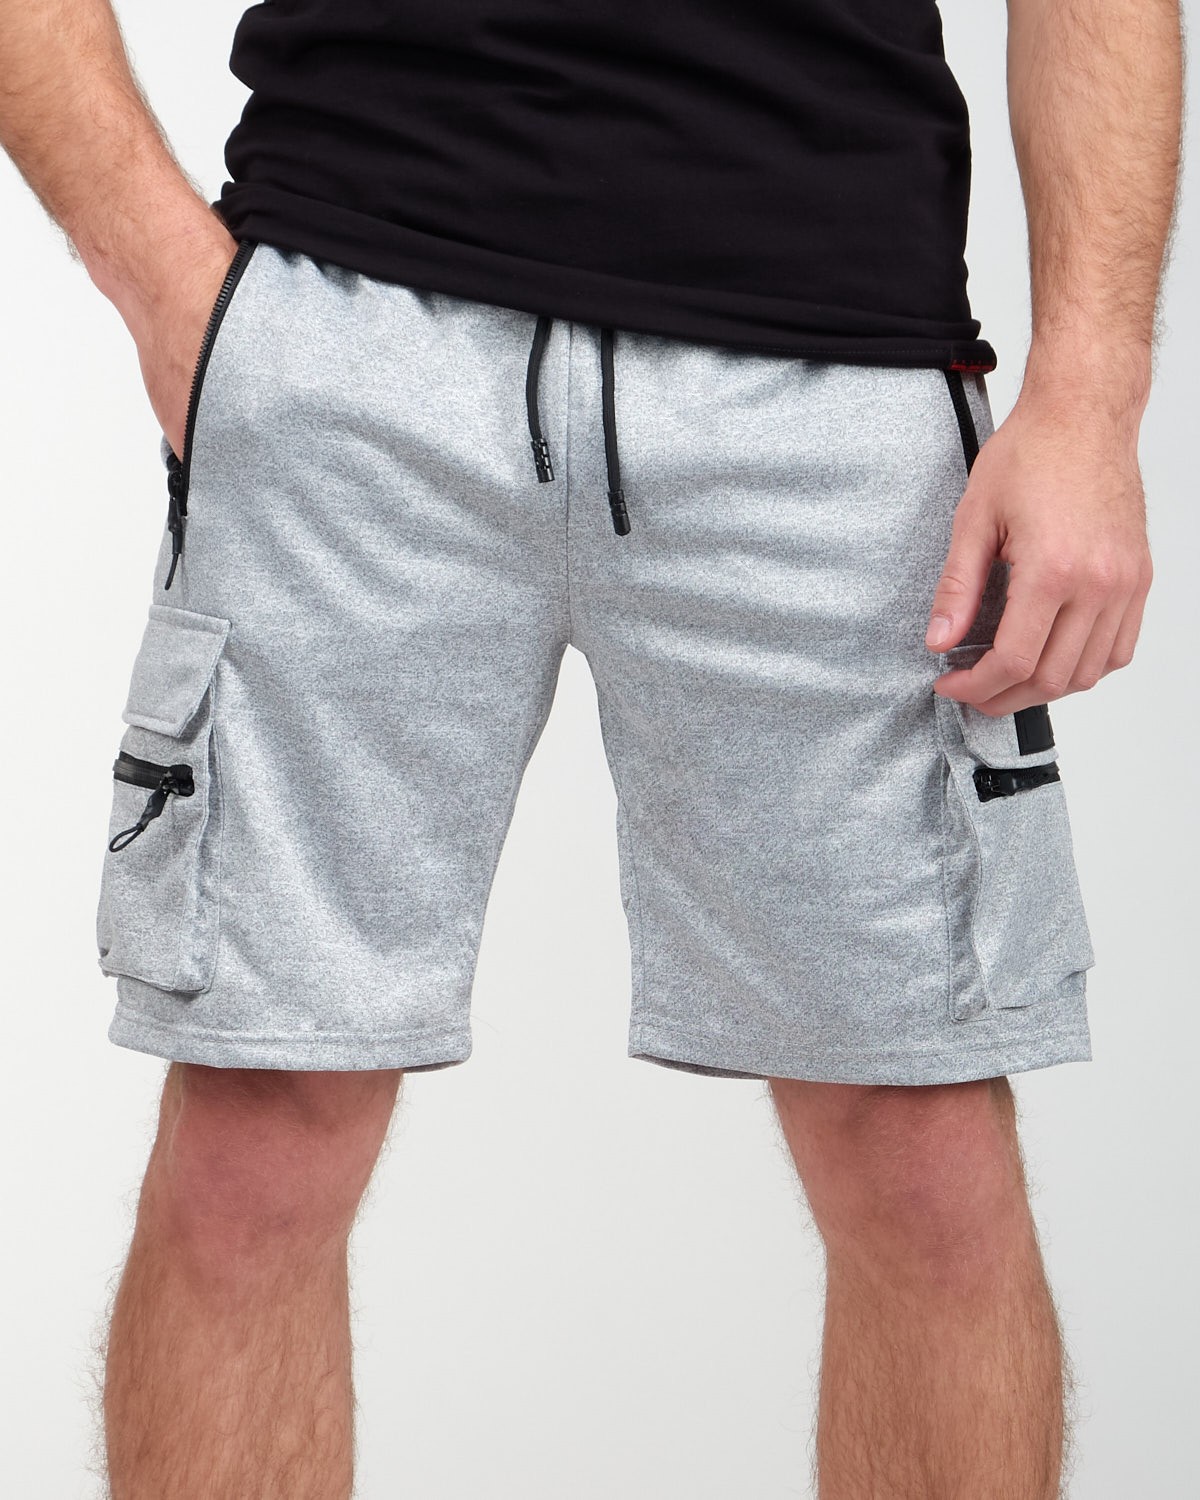 SPORT IS YOUR GANG Shorts All Black Logo